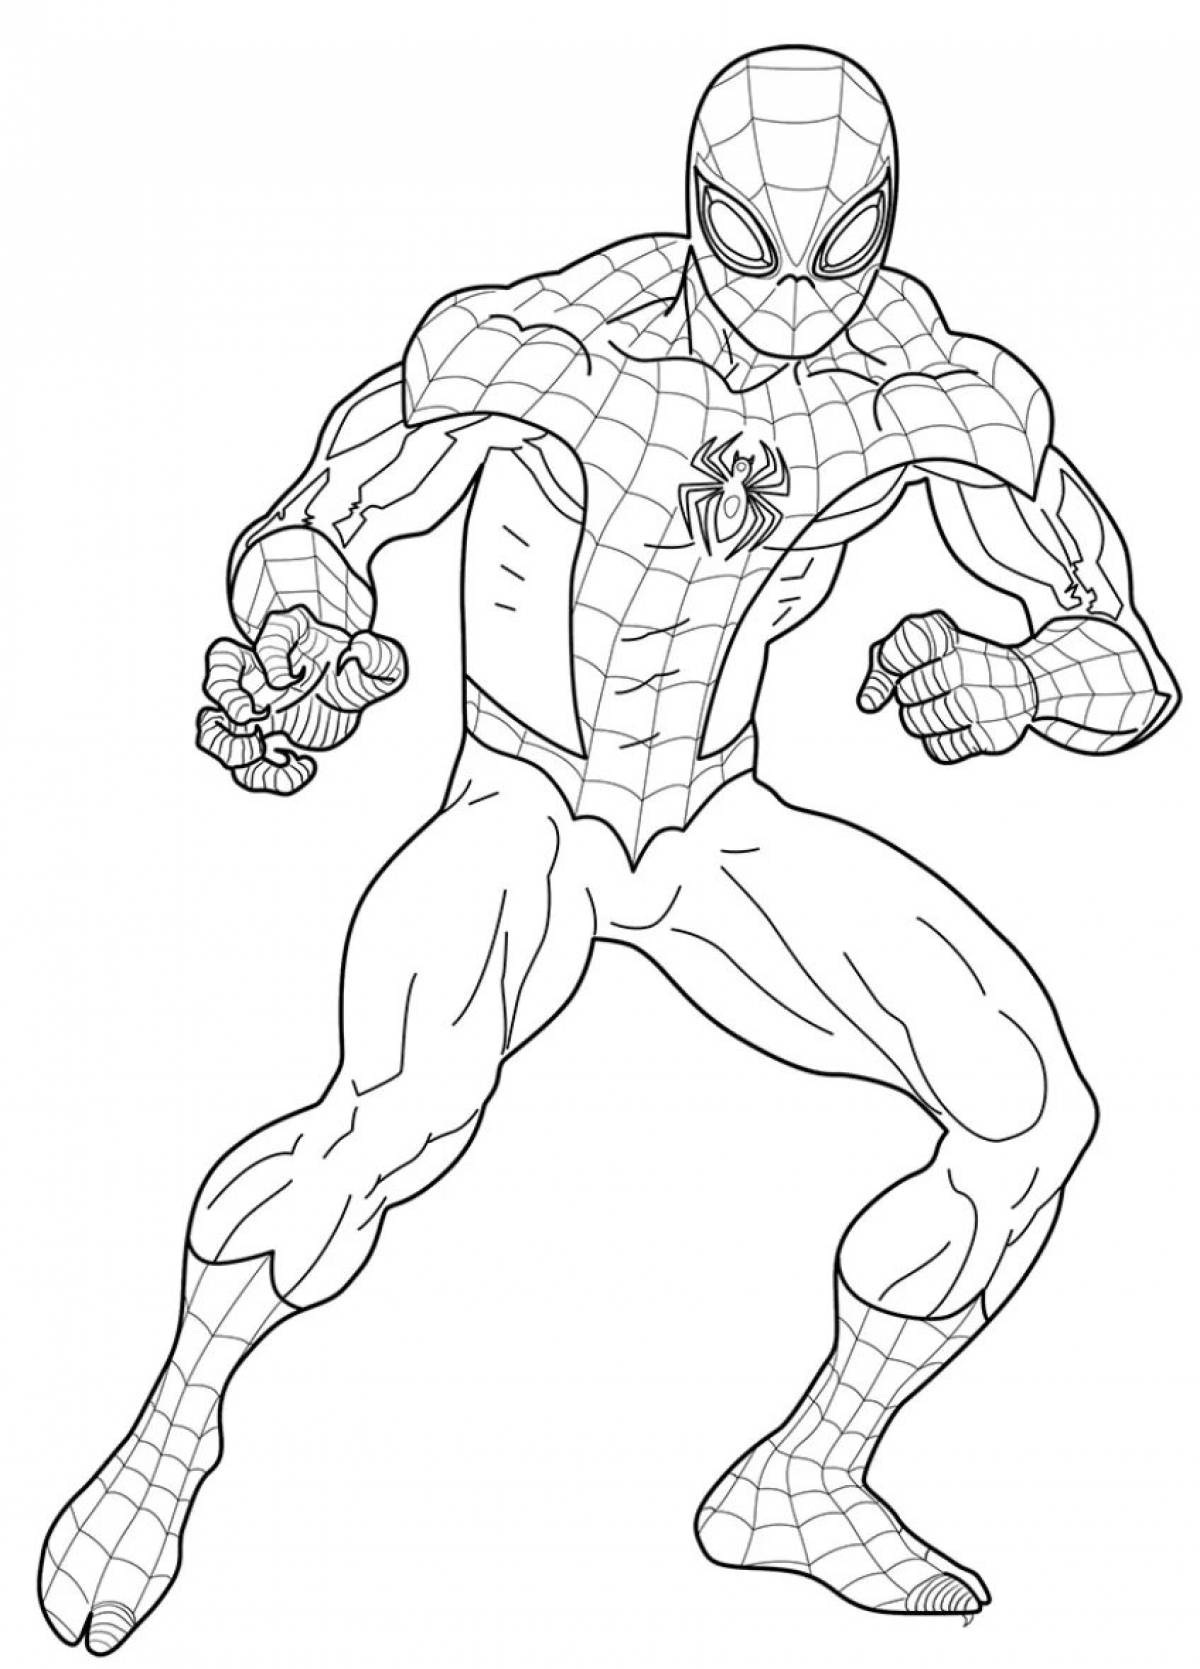 Great spiderman coloring page for kids